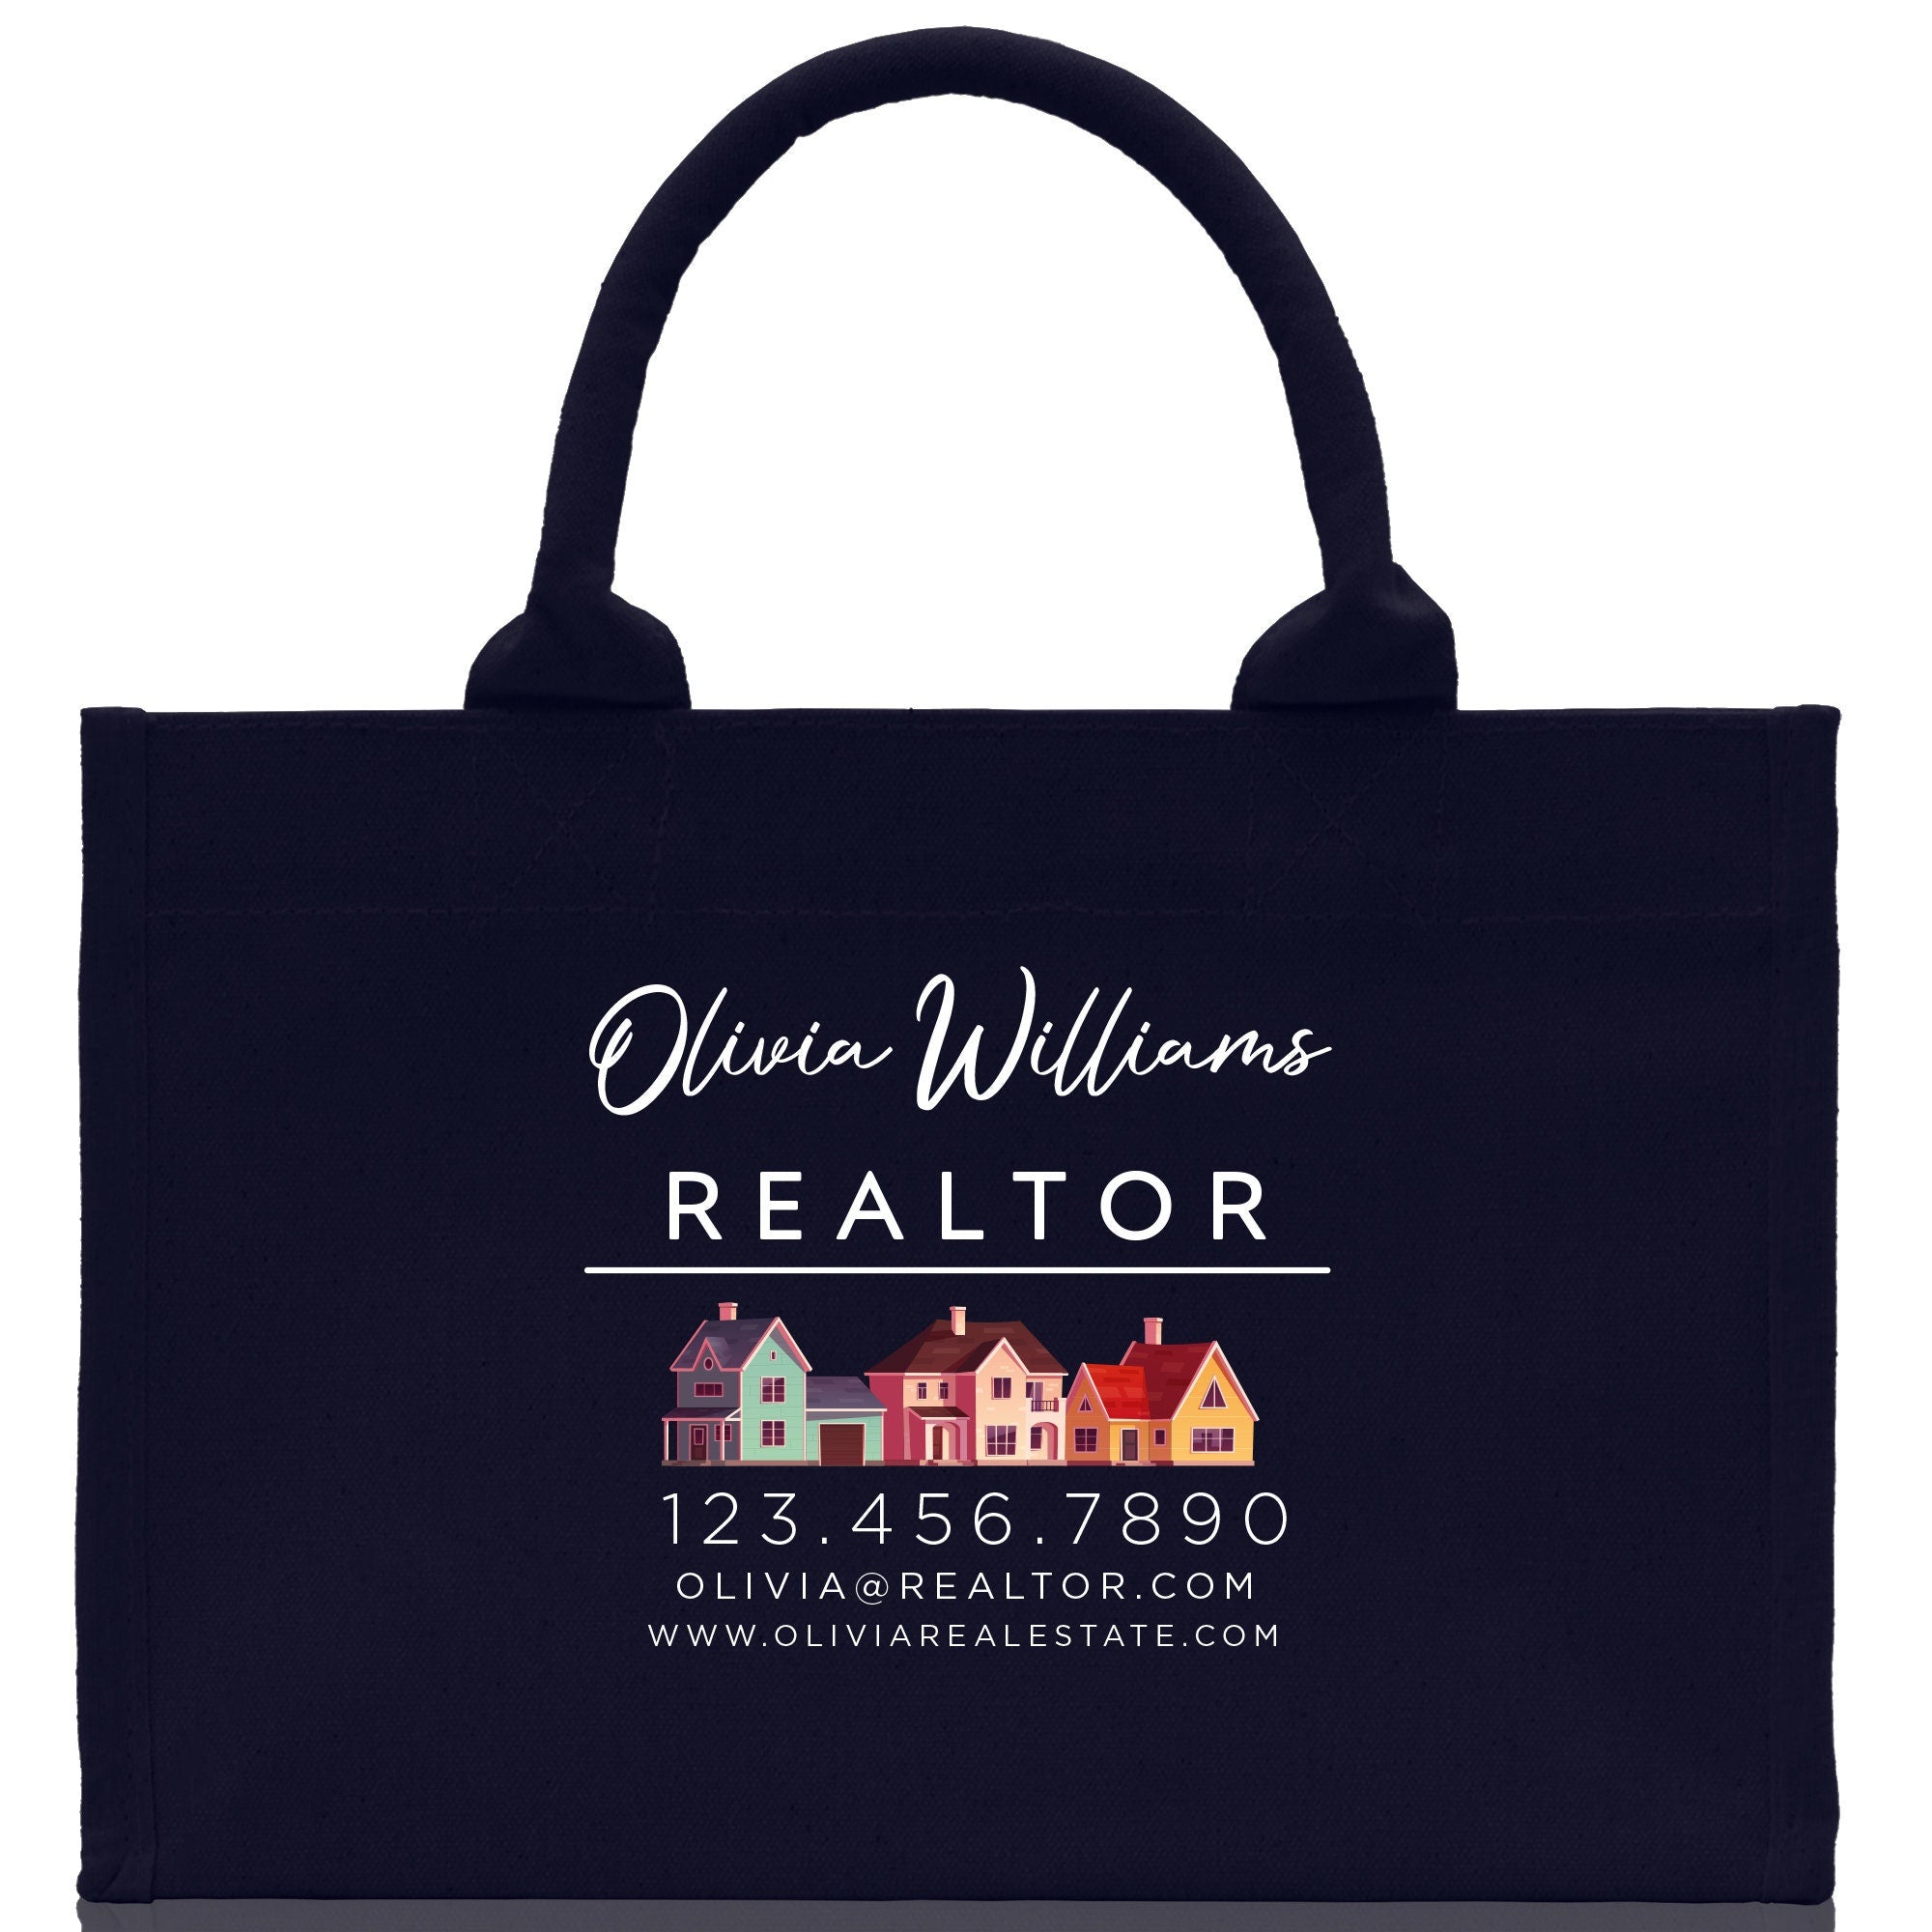 a black shopping bag with a realtor logo on it